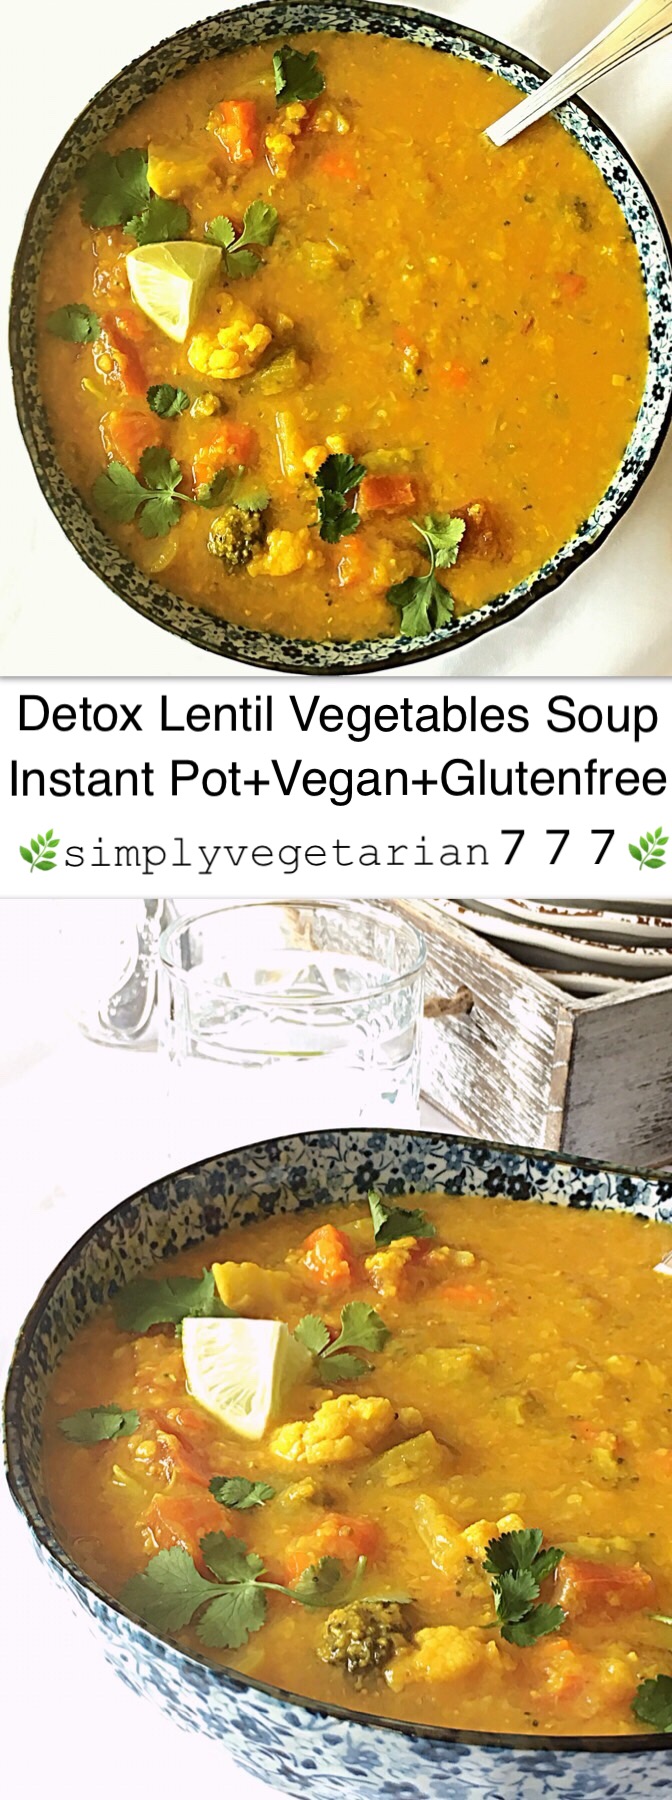 Instant Pot Detox Lentil Vegetables Soup is a SUPER DELICIOUS, LIGHT, and NOURISHING SOUP. This soup is made with Lentils and Seasonal Vegetables. It is EASY, EFFICIENT & made with Everyday Ingredients. #instantpotrecipes #instantpotglutenfree #instantpotveganrecipes #instantpotsoups #instantpotlentils #instantpotdetoxsoup #instantpoteasyrecipes #instantpothealthyrecipes #instantpotdetoxsouprecipes #instantpotlentilsoup #insatntpotturmericsoup #instantpotindianrecipes